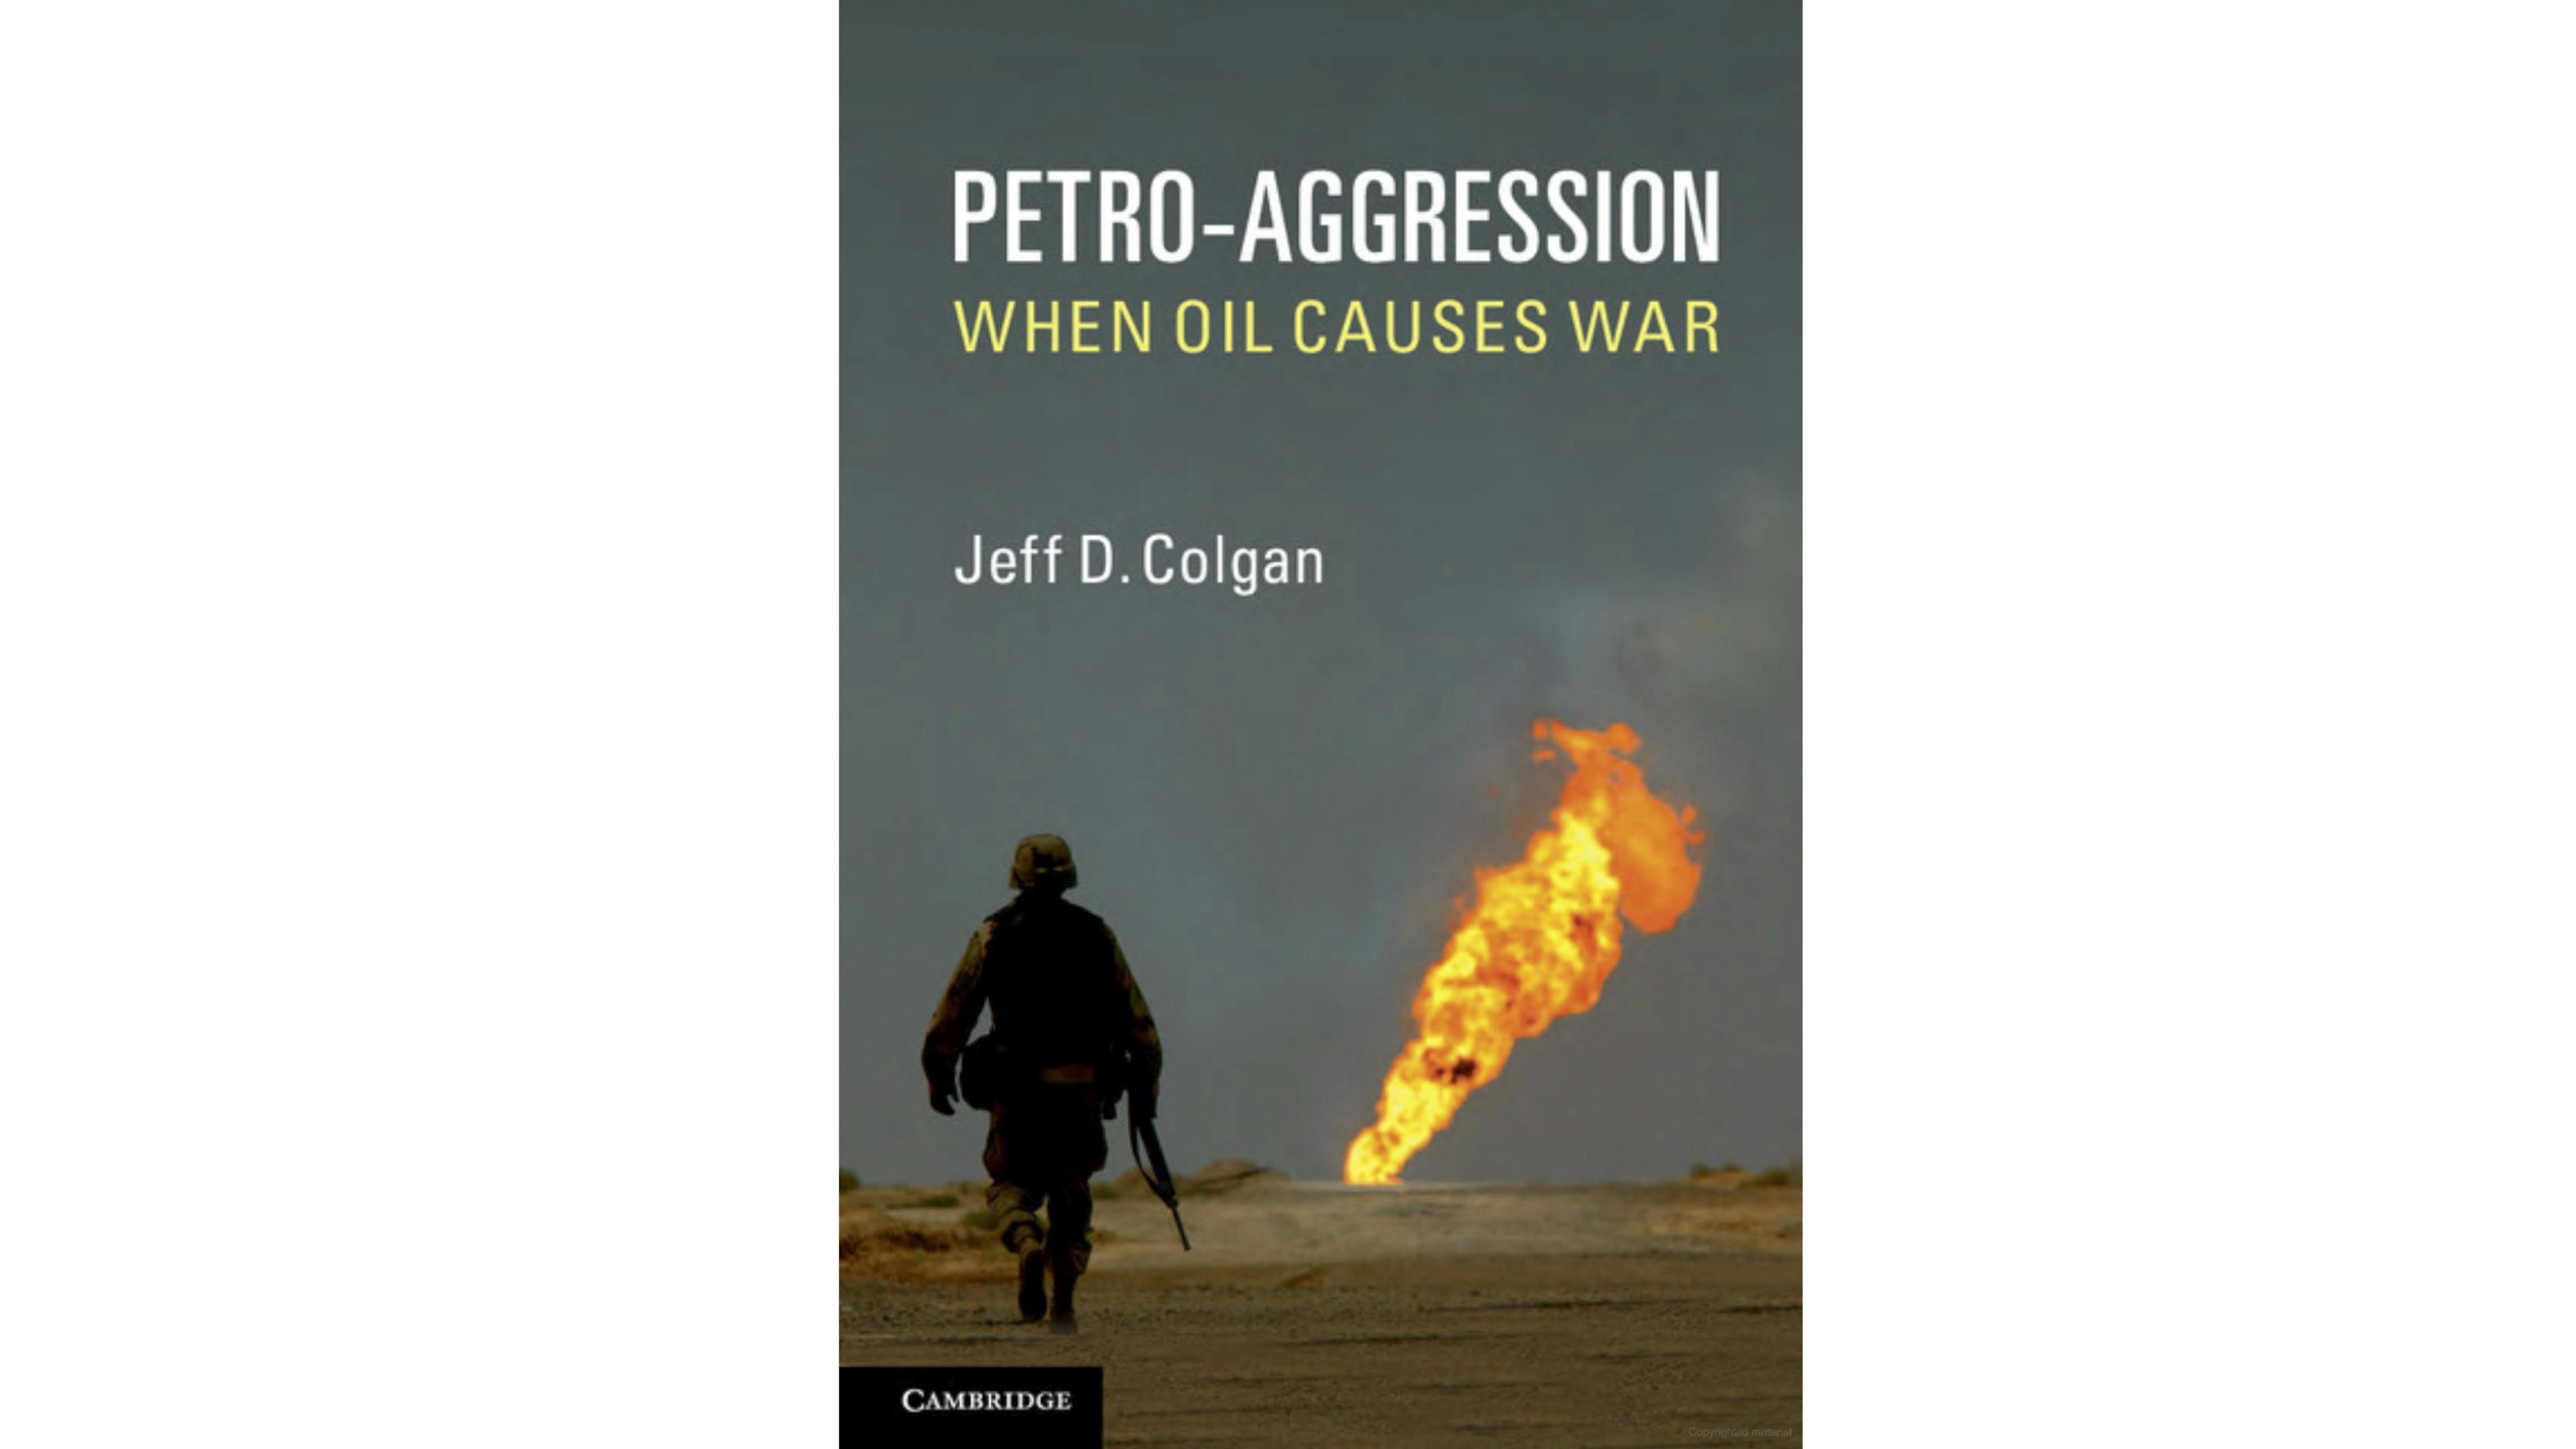 Petro-Aggression: When Oil Causes War by Jeff Colgan